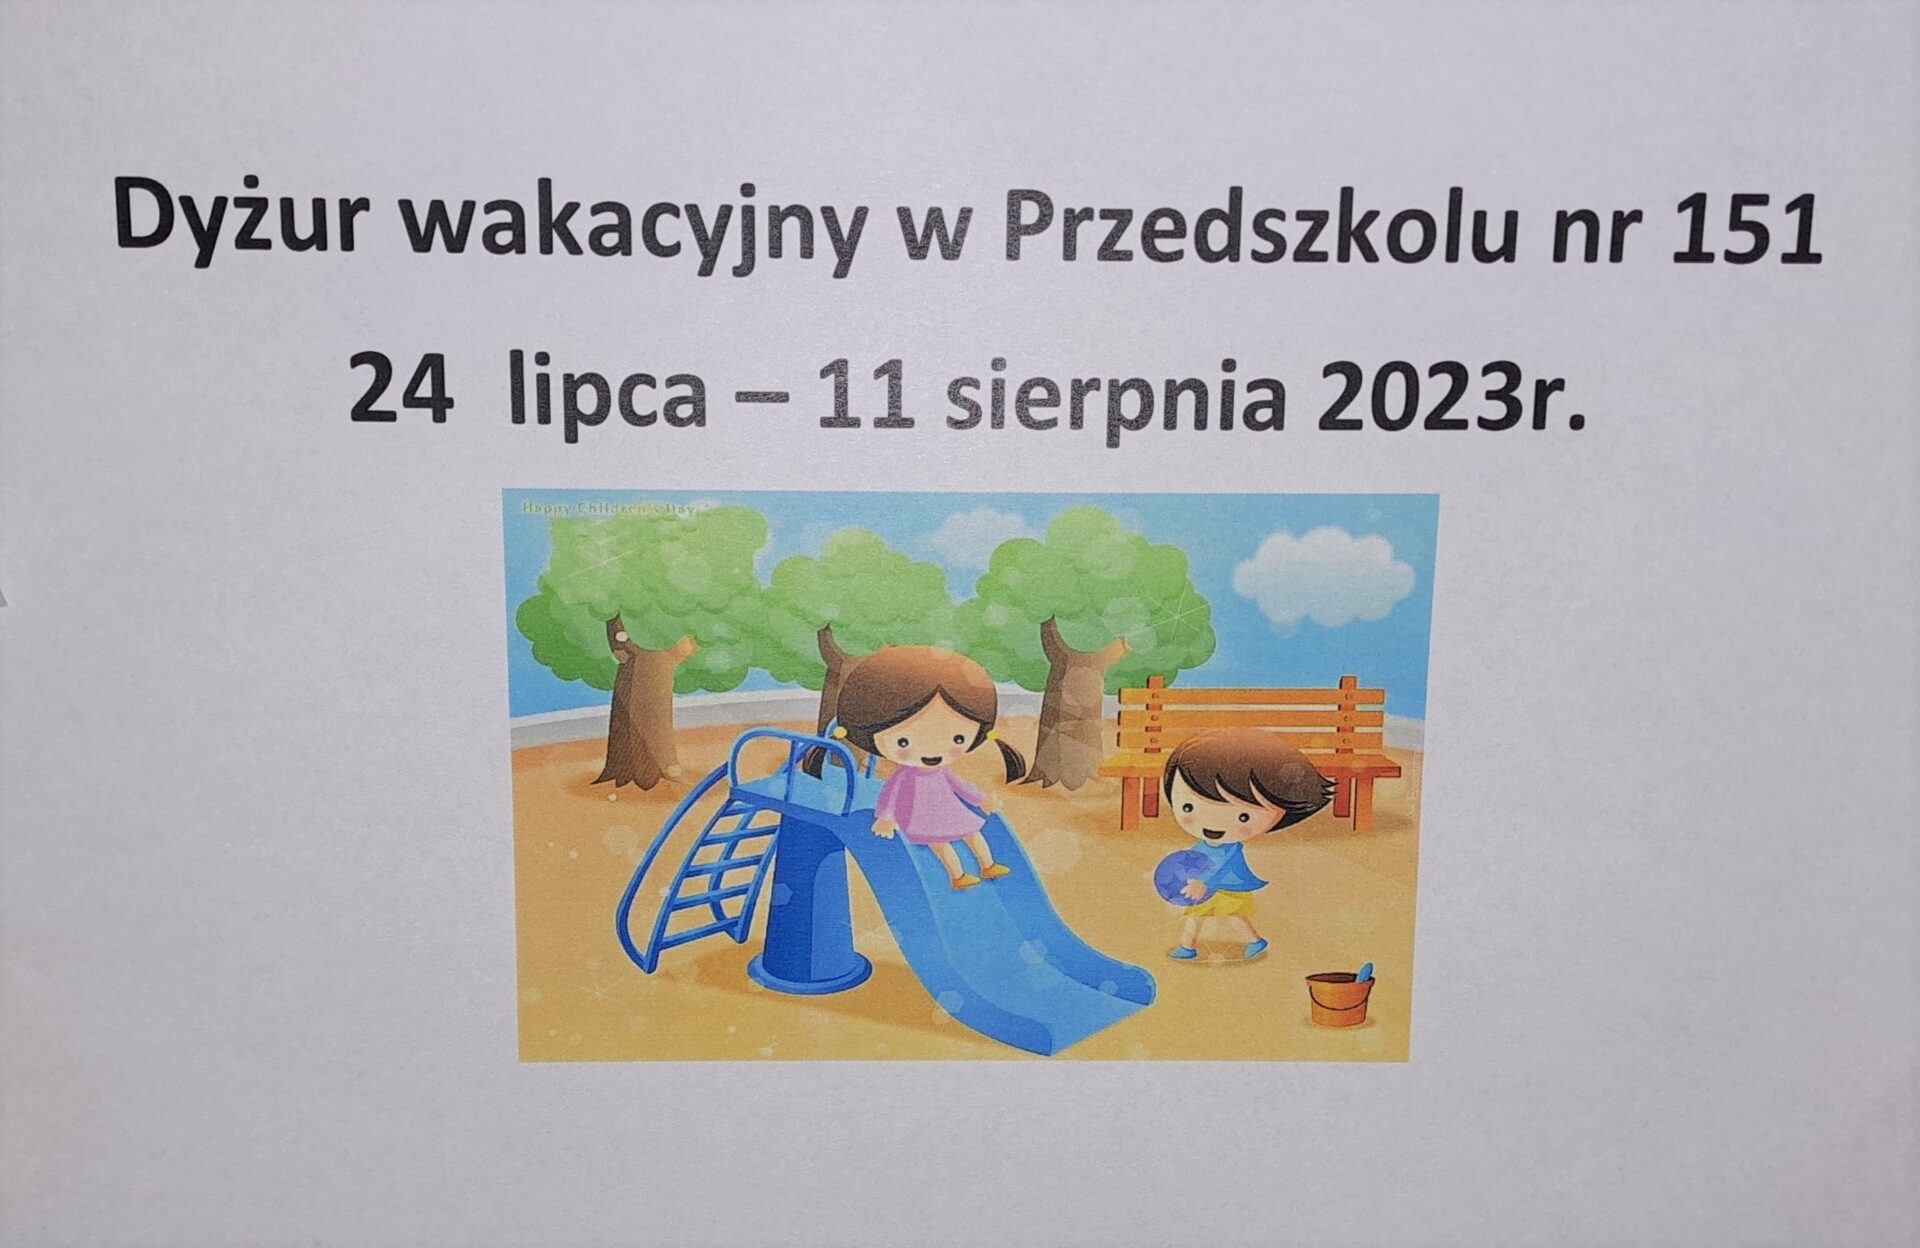 You are currently viewing Dyżur wakacyjny 2023